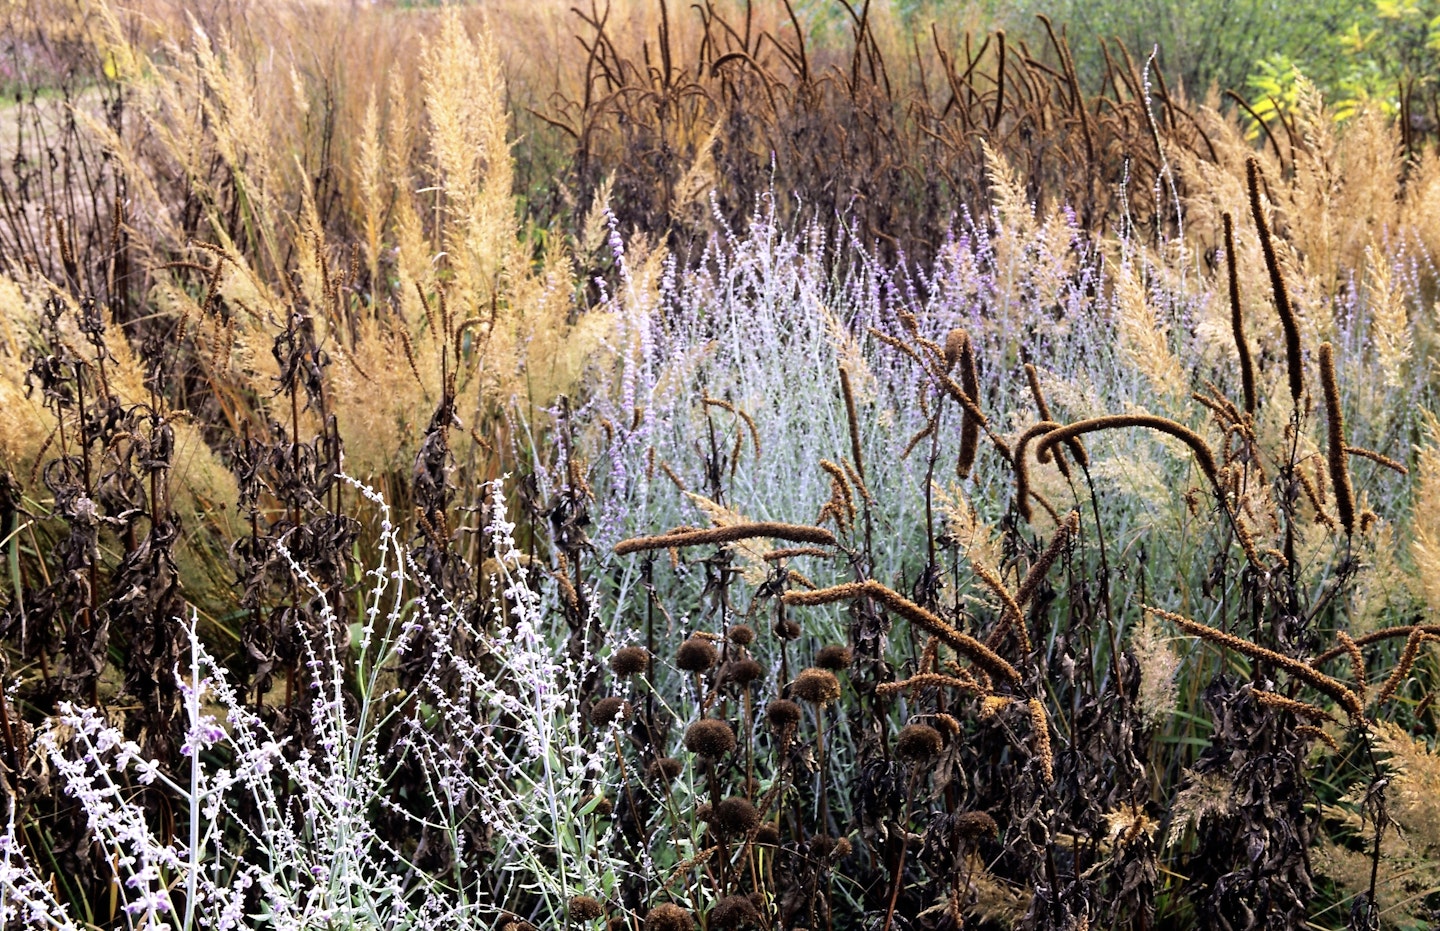 Grasses, perovskia and veronicastrum sparkle in frost